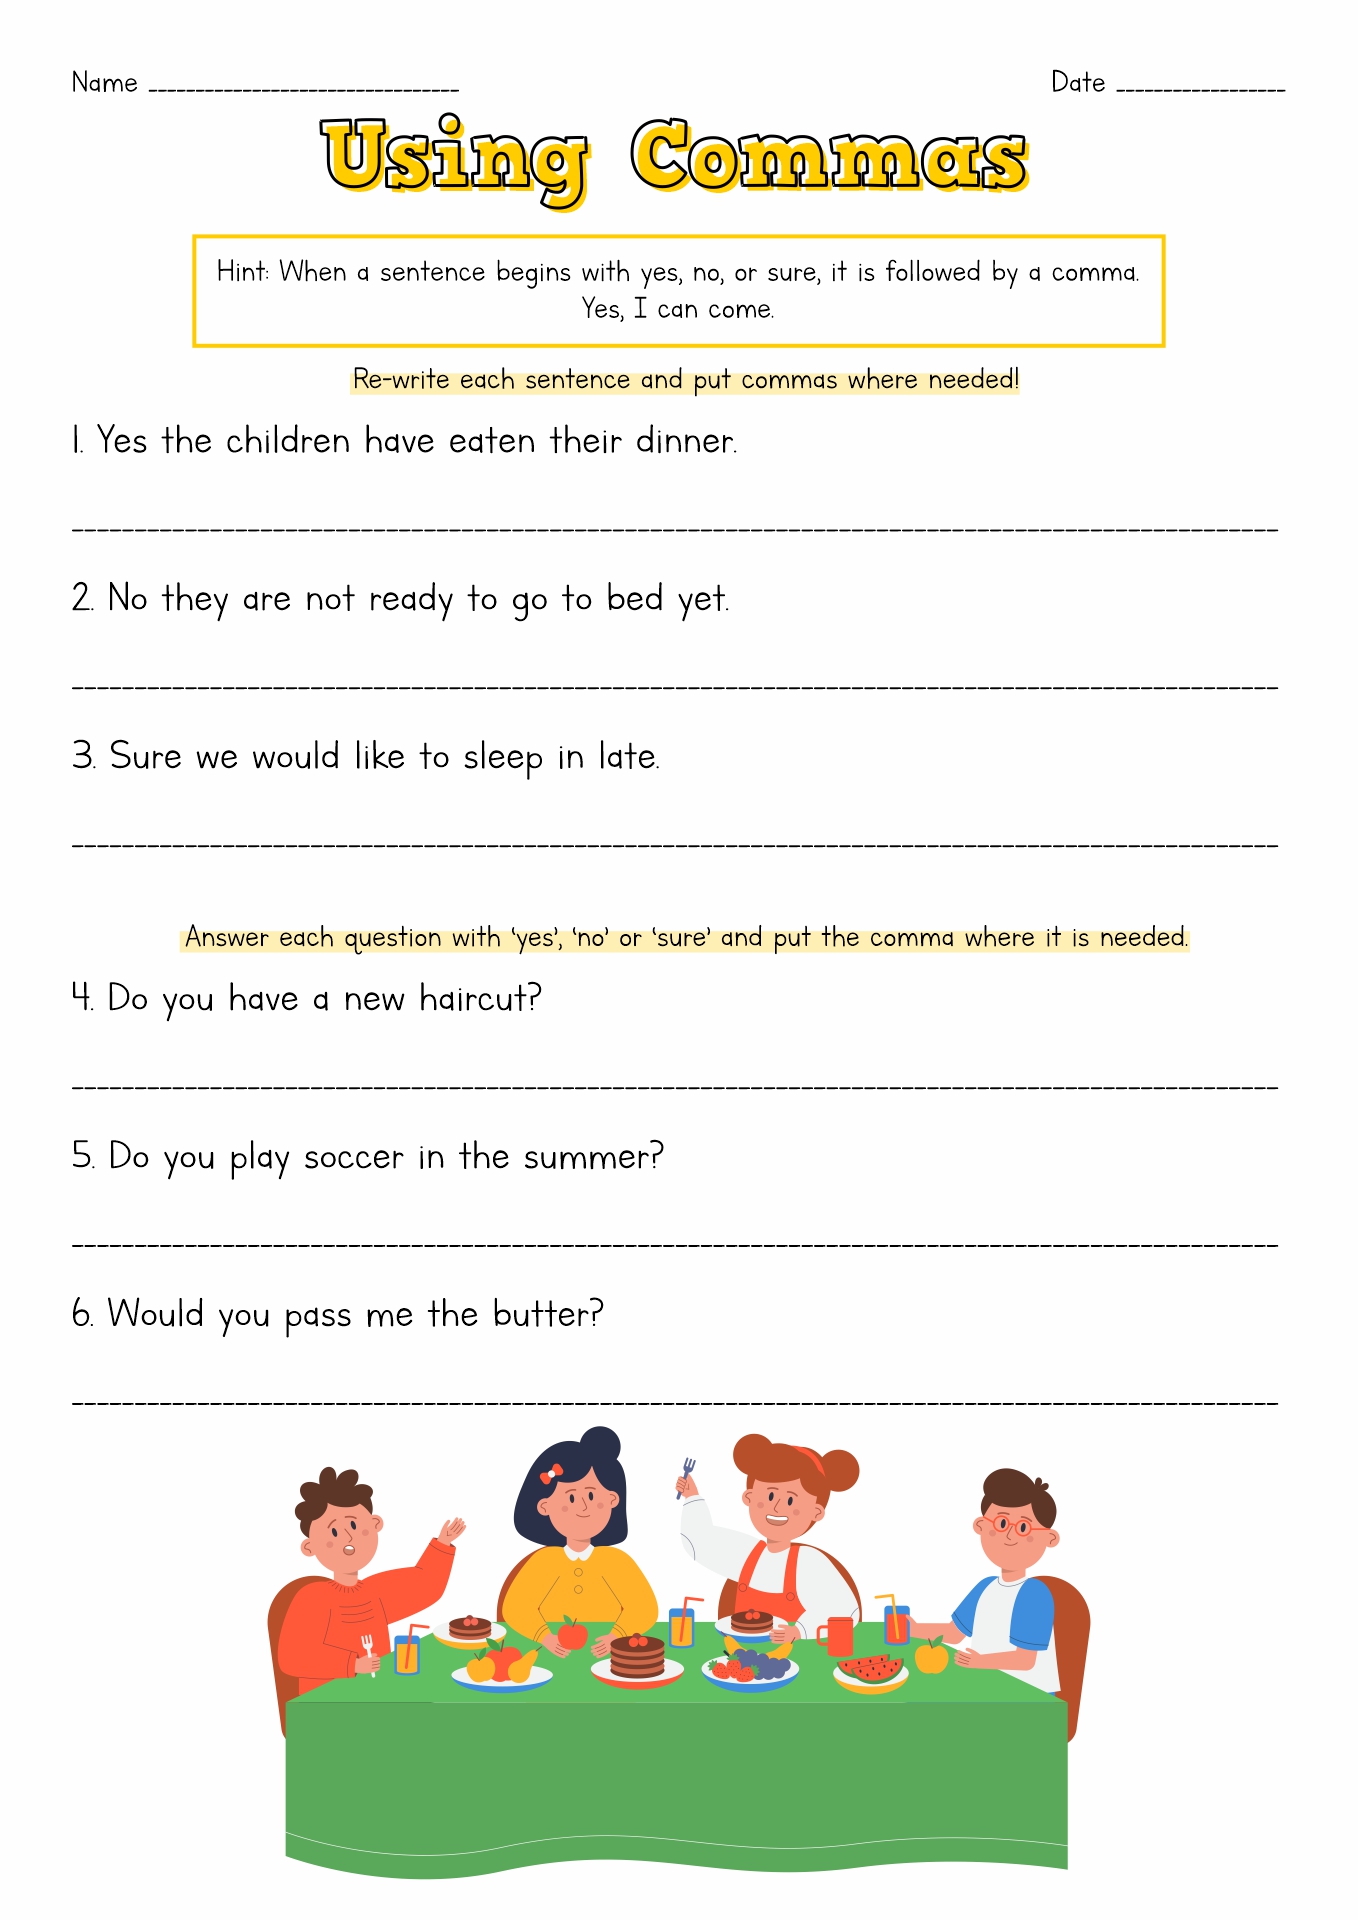 free-punctuation-practice-worksheets